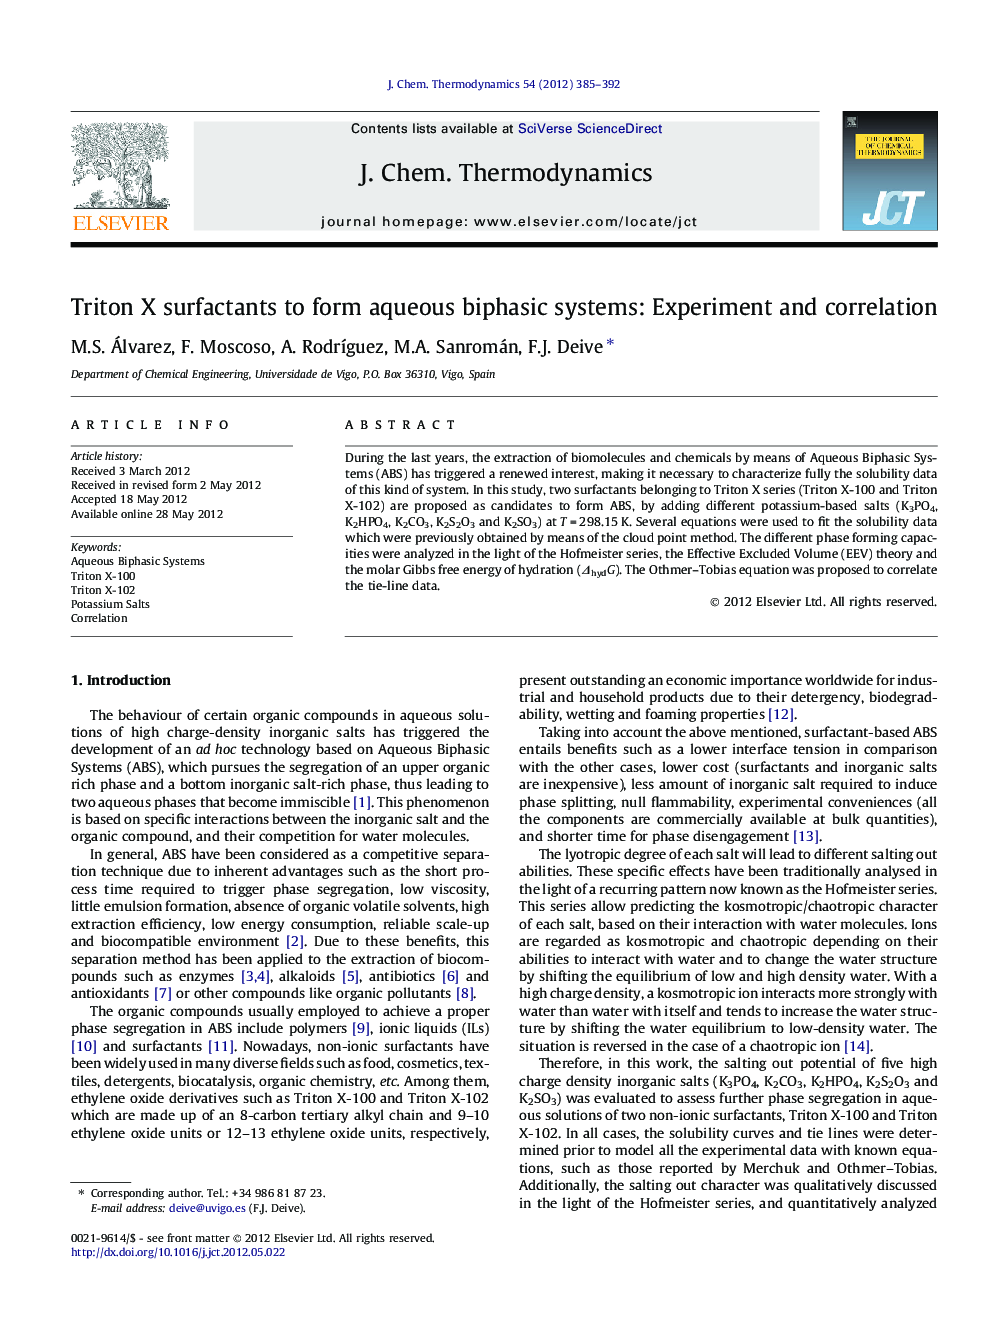 Triton X surfactants to form aqueous biphasic systems: Experiment and correlation